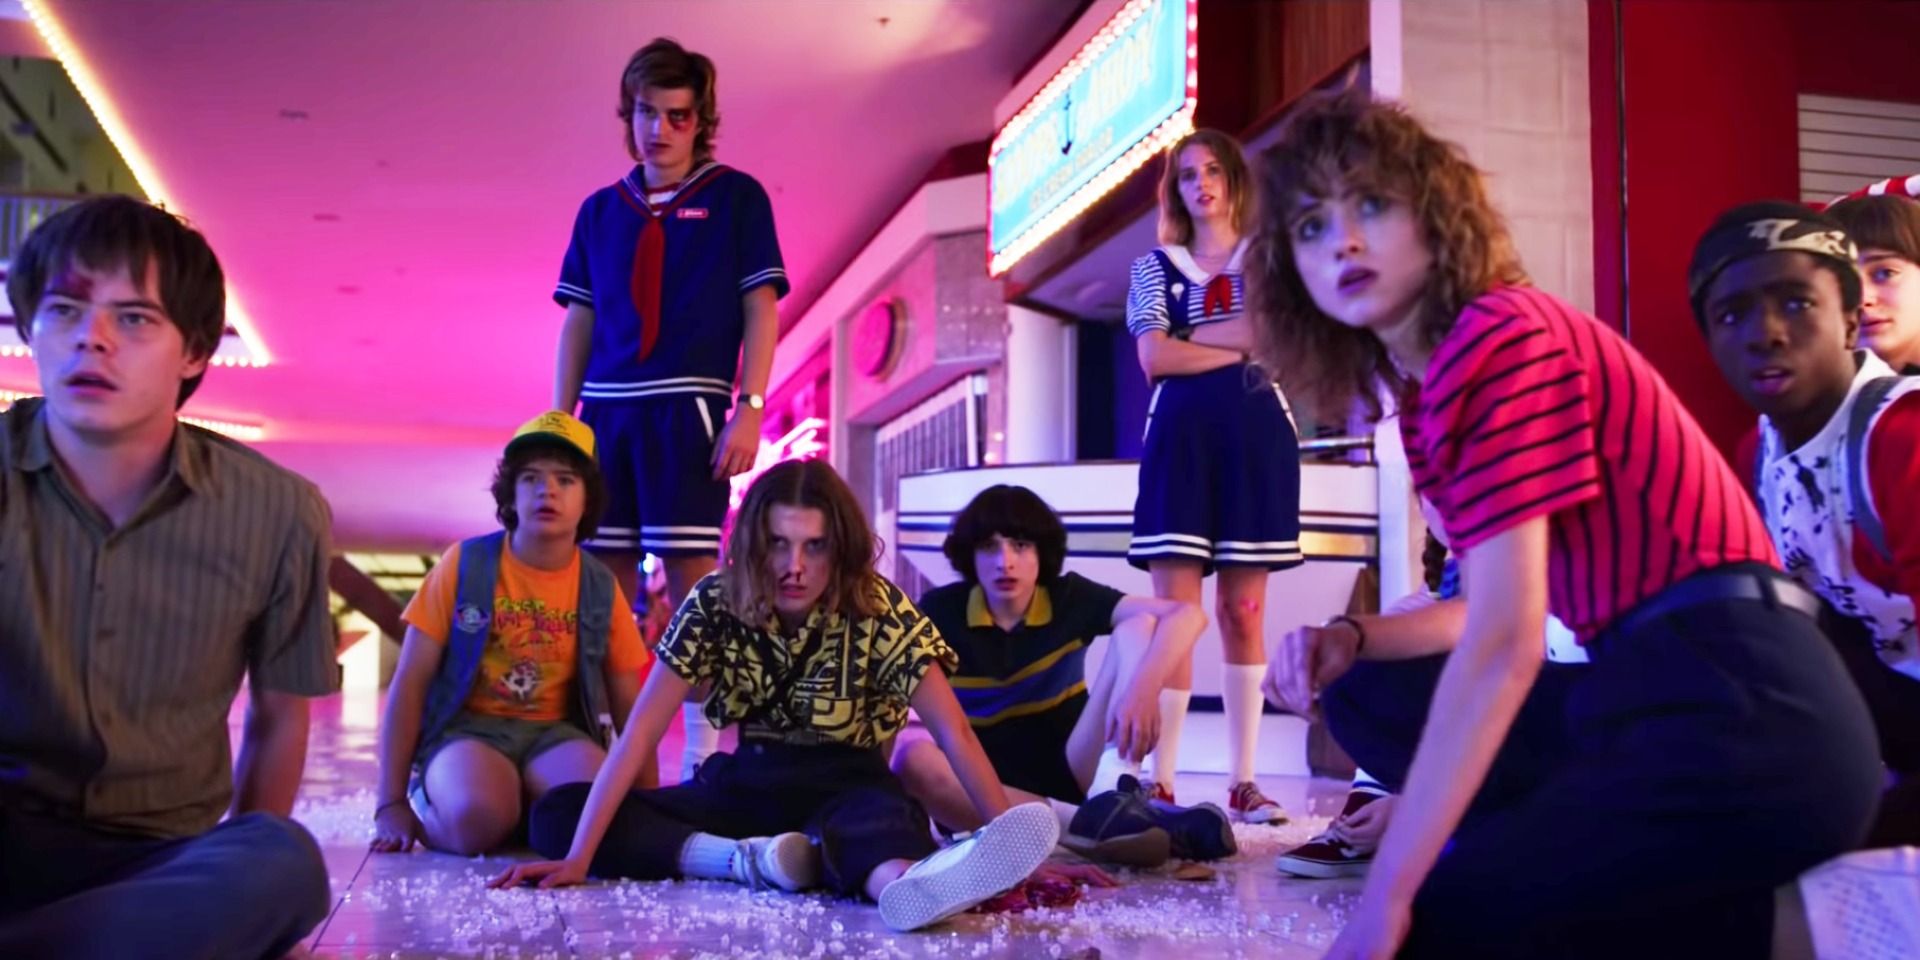 Cast photo of The Party in Stranger Things